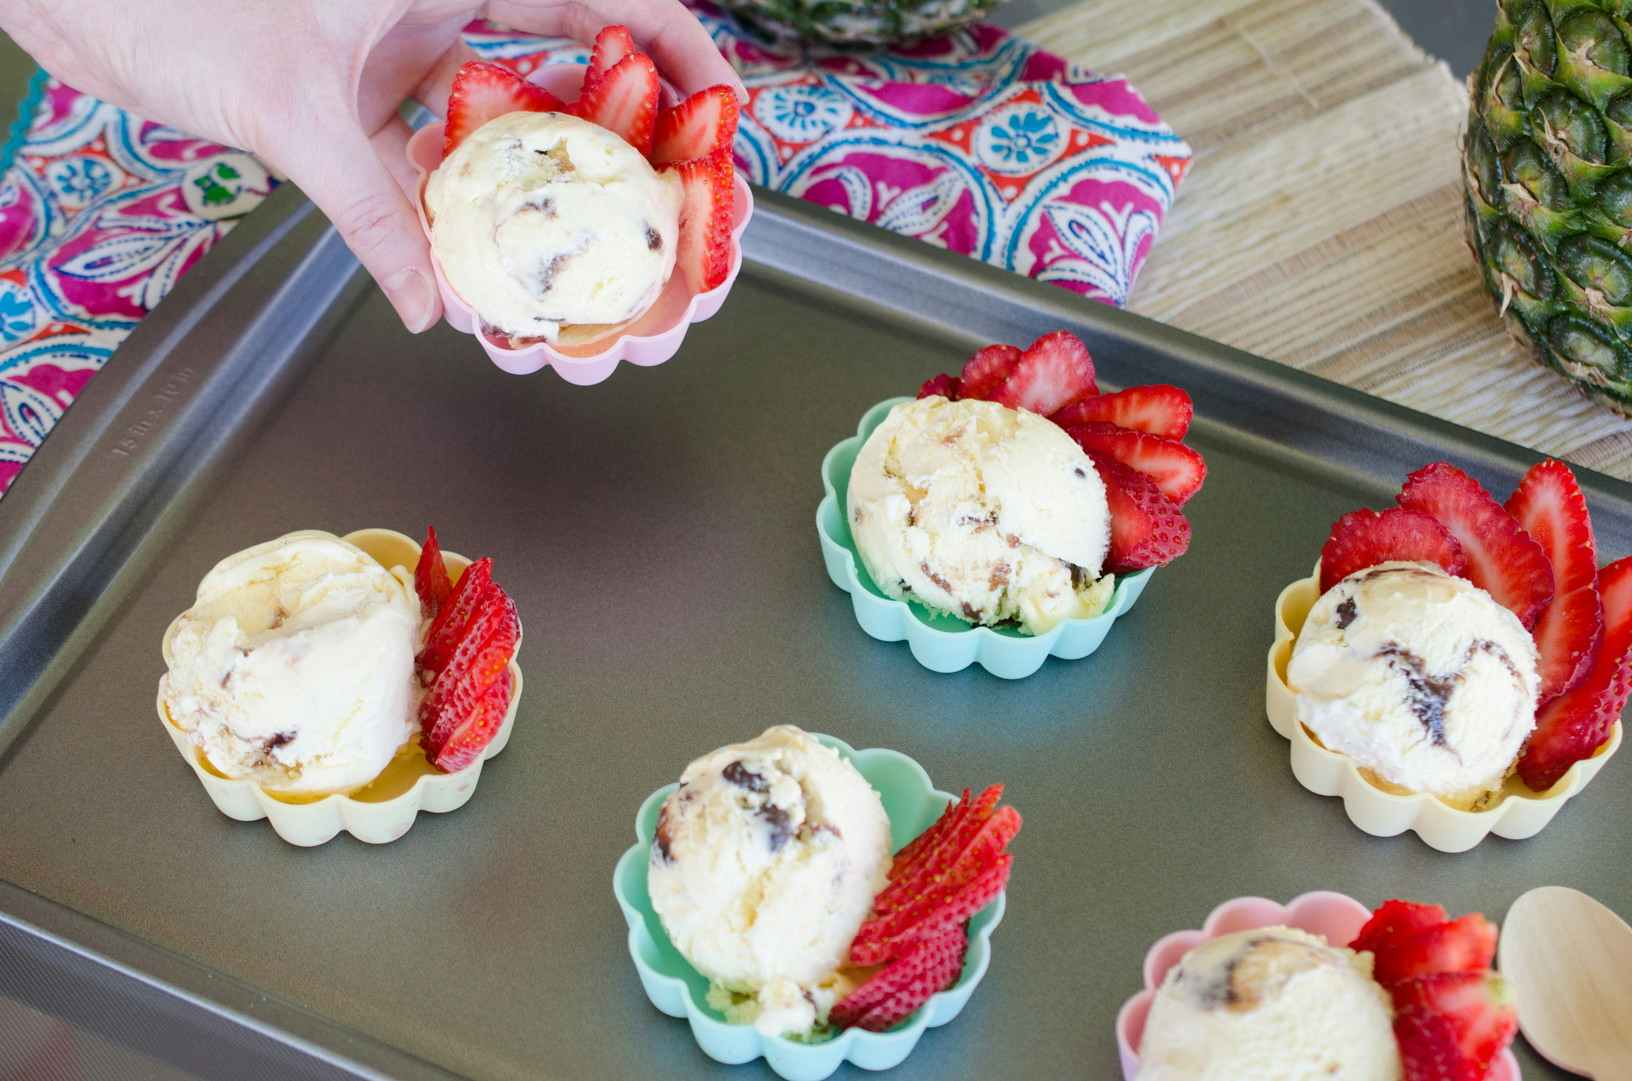 A person's hand picking up a cup of ice cream from a tray of little colorful cups with pre-scooped ice cream and strawberries.